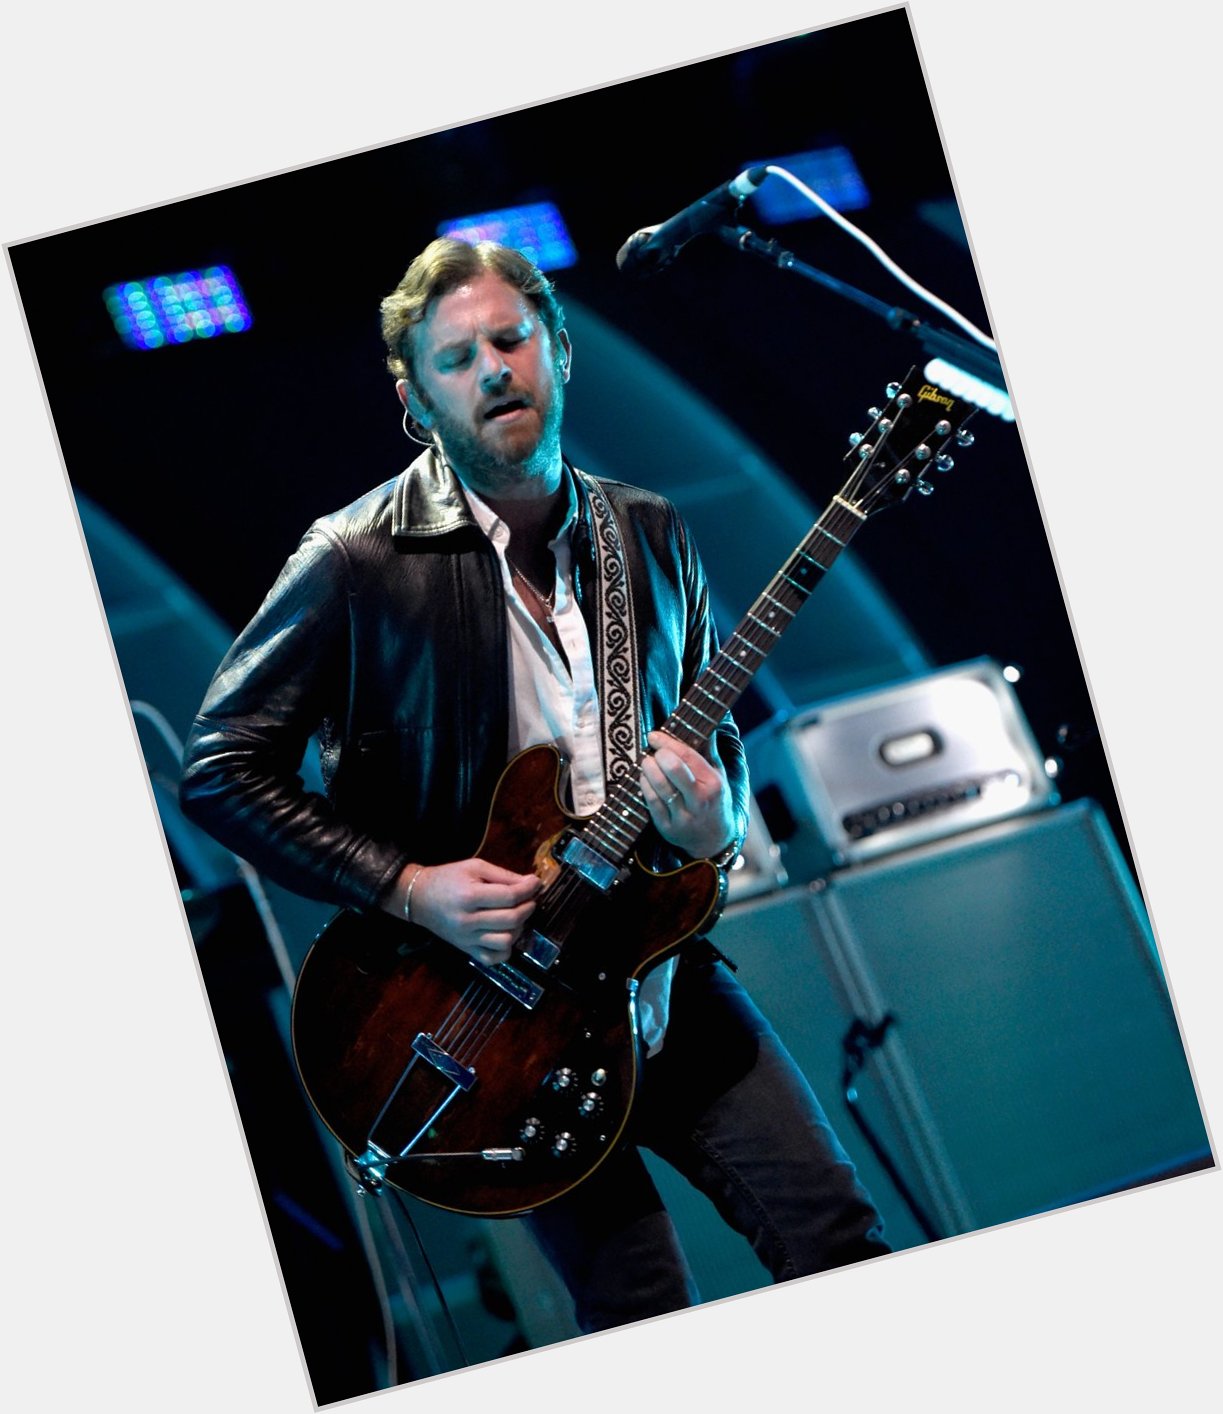 Today is just FULL of great birthdays! Happy birthday to Caleb Followill of ! 